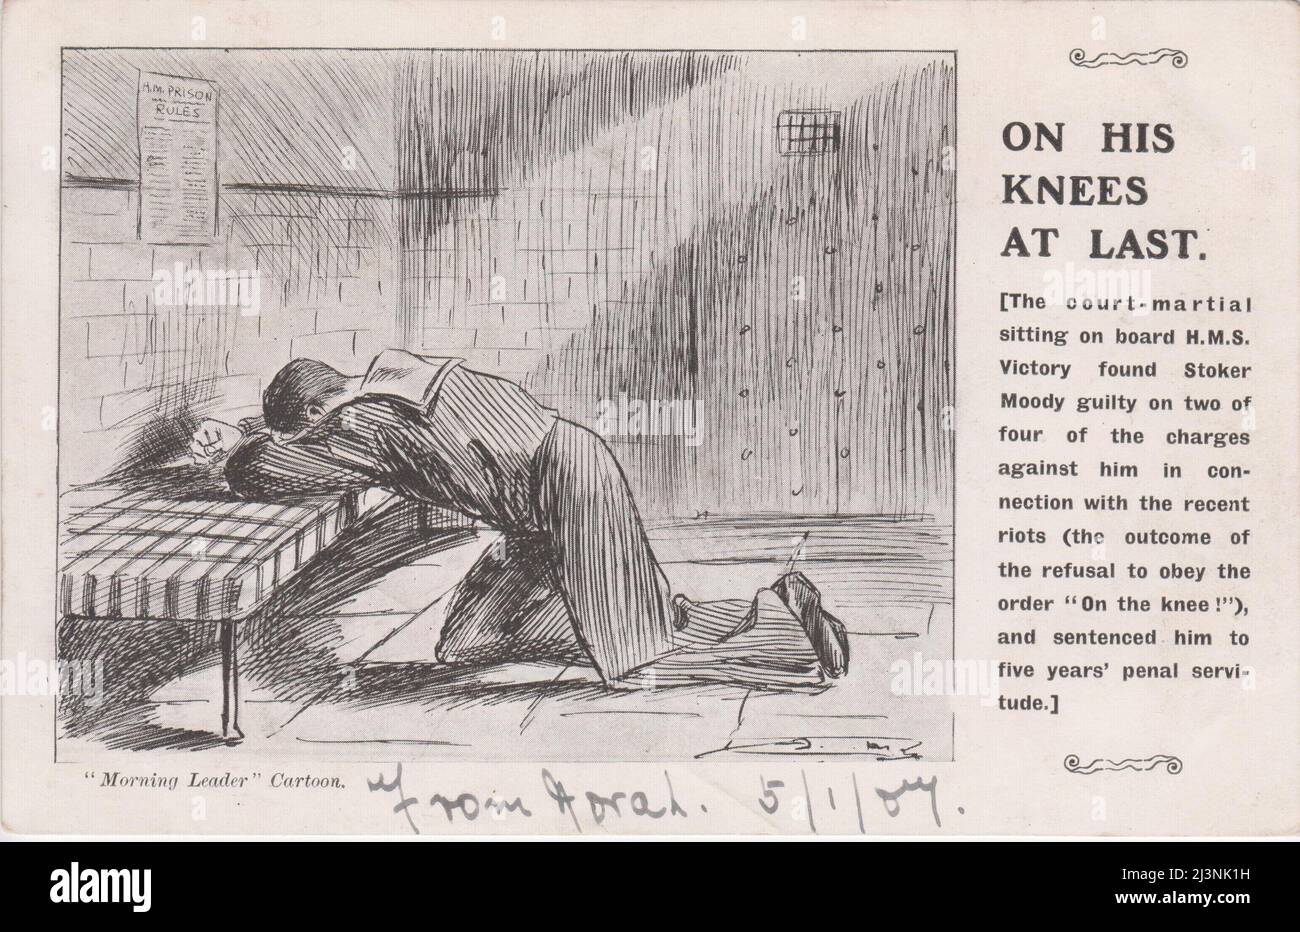 'On his knees at last': Stoker Moody in a prison cell after court martial. 'Morning Leader' cartoon. The postcard relates to a Naval mutiny at Portsmouth in 1905. 'On the knee' was an order used by officers to command men to kneel when firing a small arms weapon, it could also be used as a humiliation. In 1905 a group of unruly stokers refused to kneel when ordered on the parade ground & subsequently rioted. Some were court martialled & one man, Edward Allen Moody was sentenced to 5 years imprisonment, causing public protests. Stock Photo